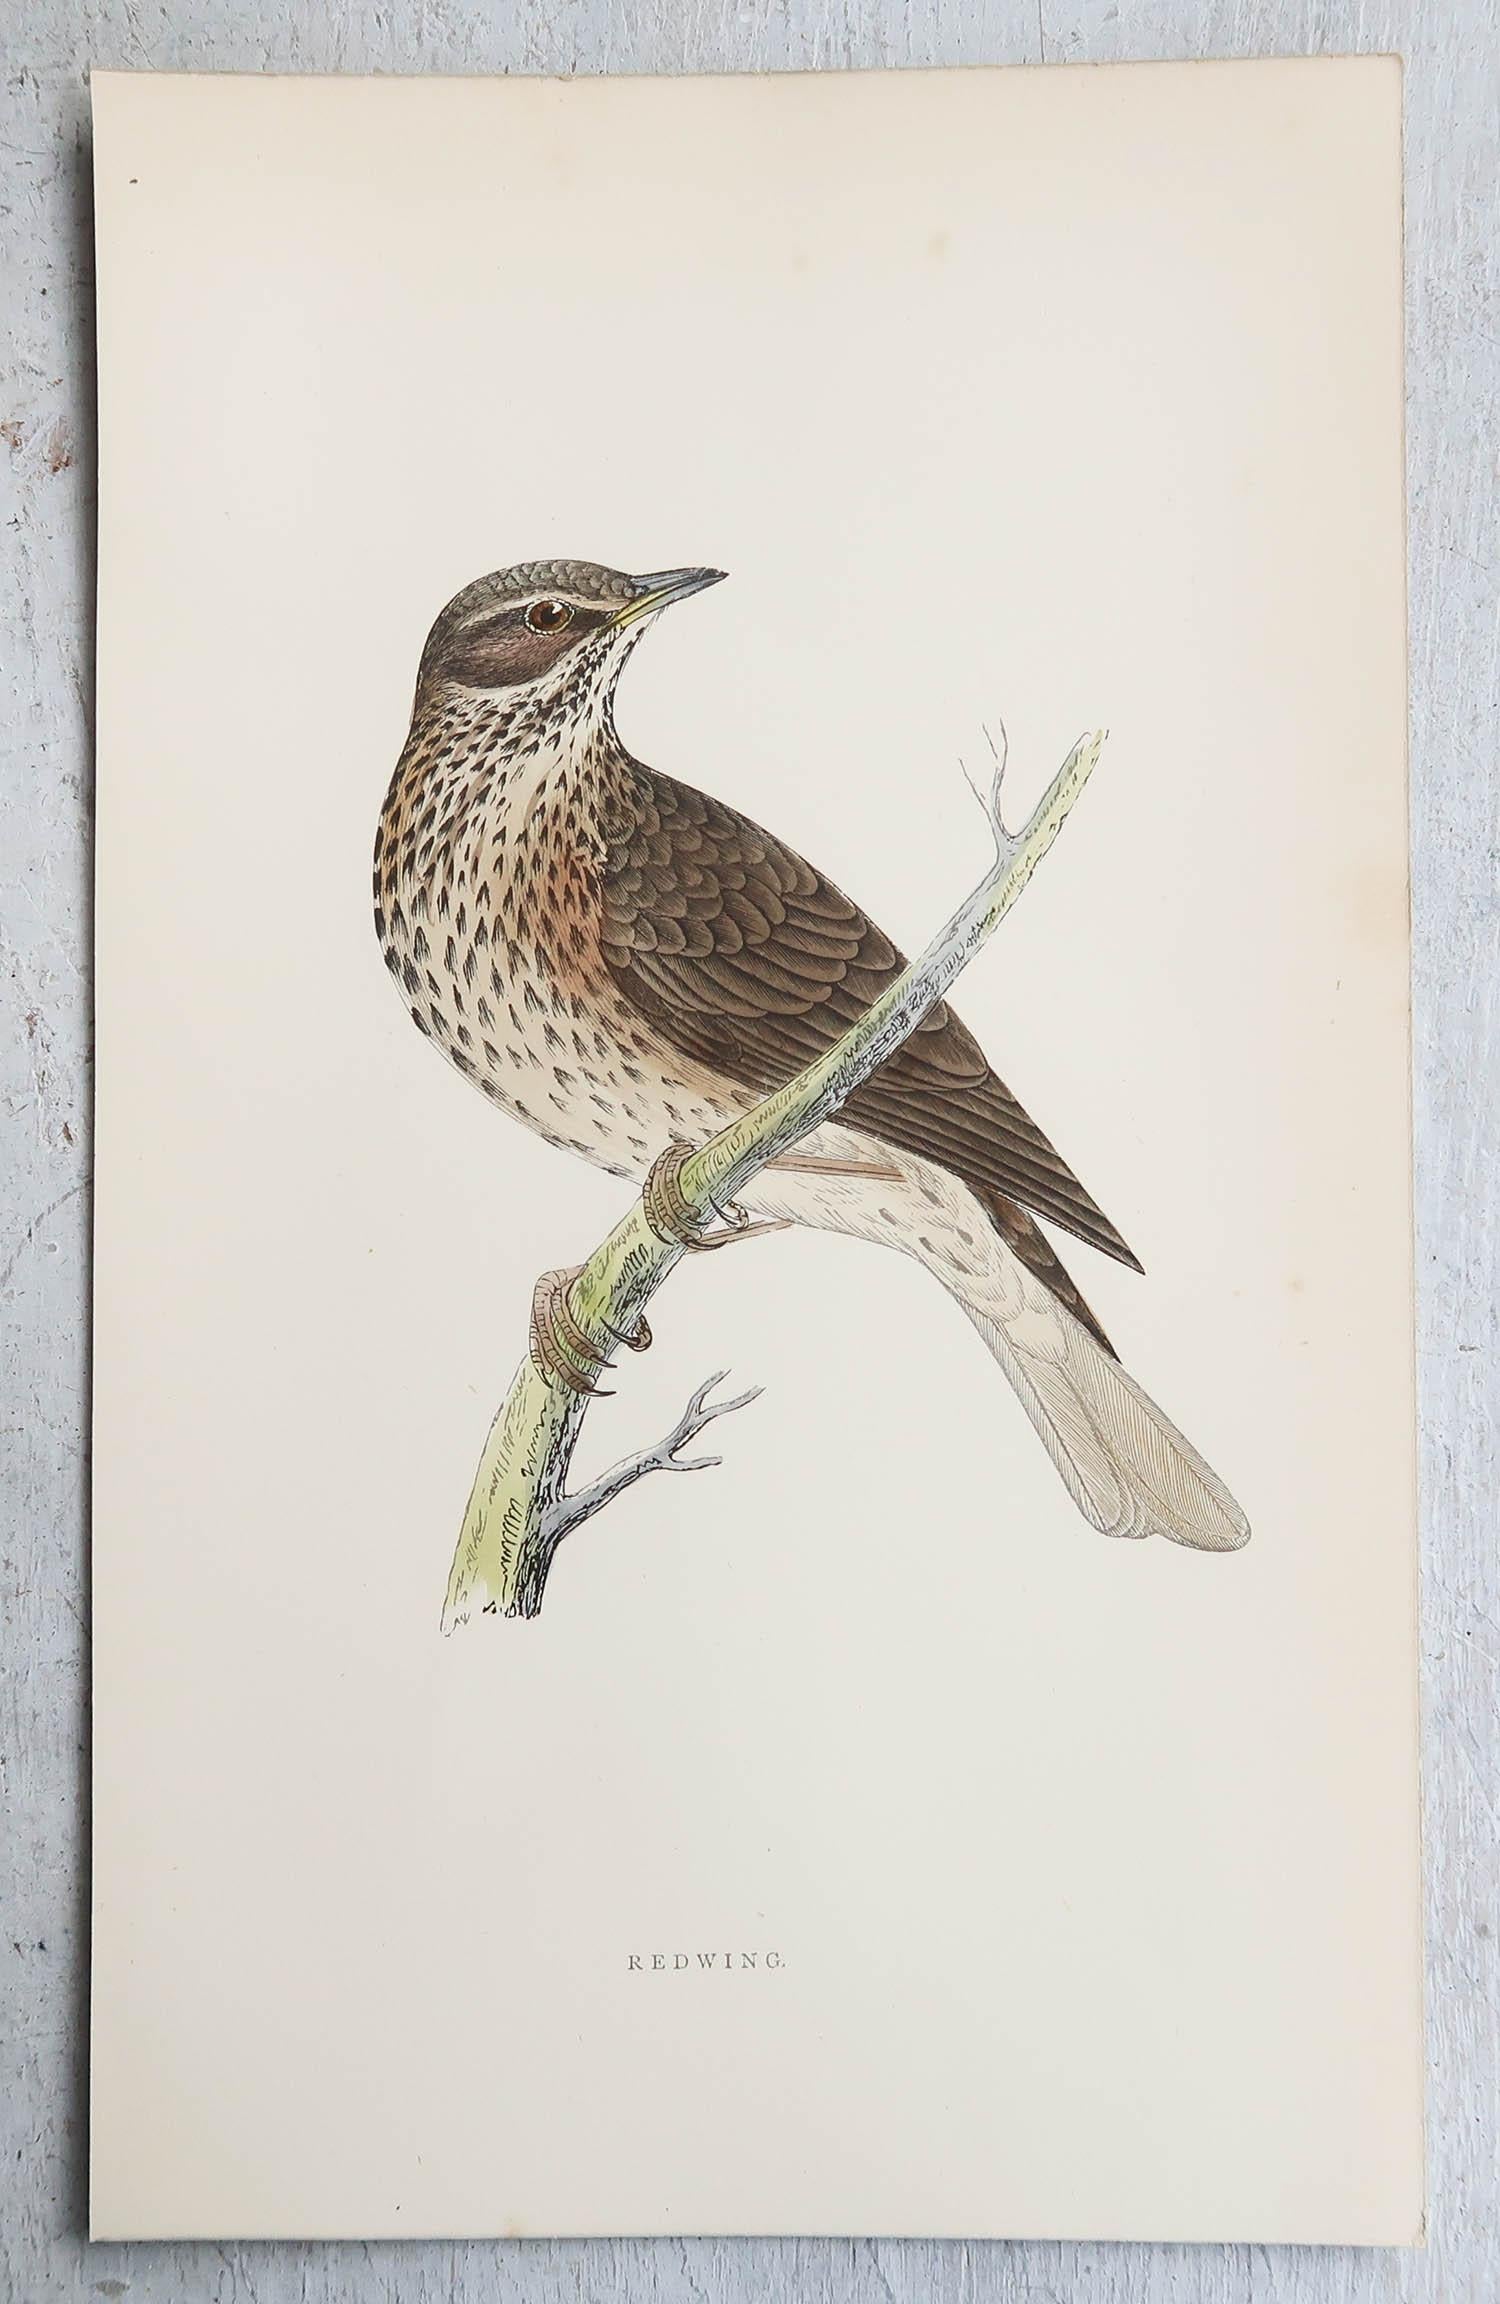 English Original Antique Print of a Redwing, circa 1880, 'Unframed' For Sale